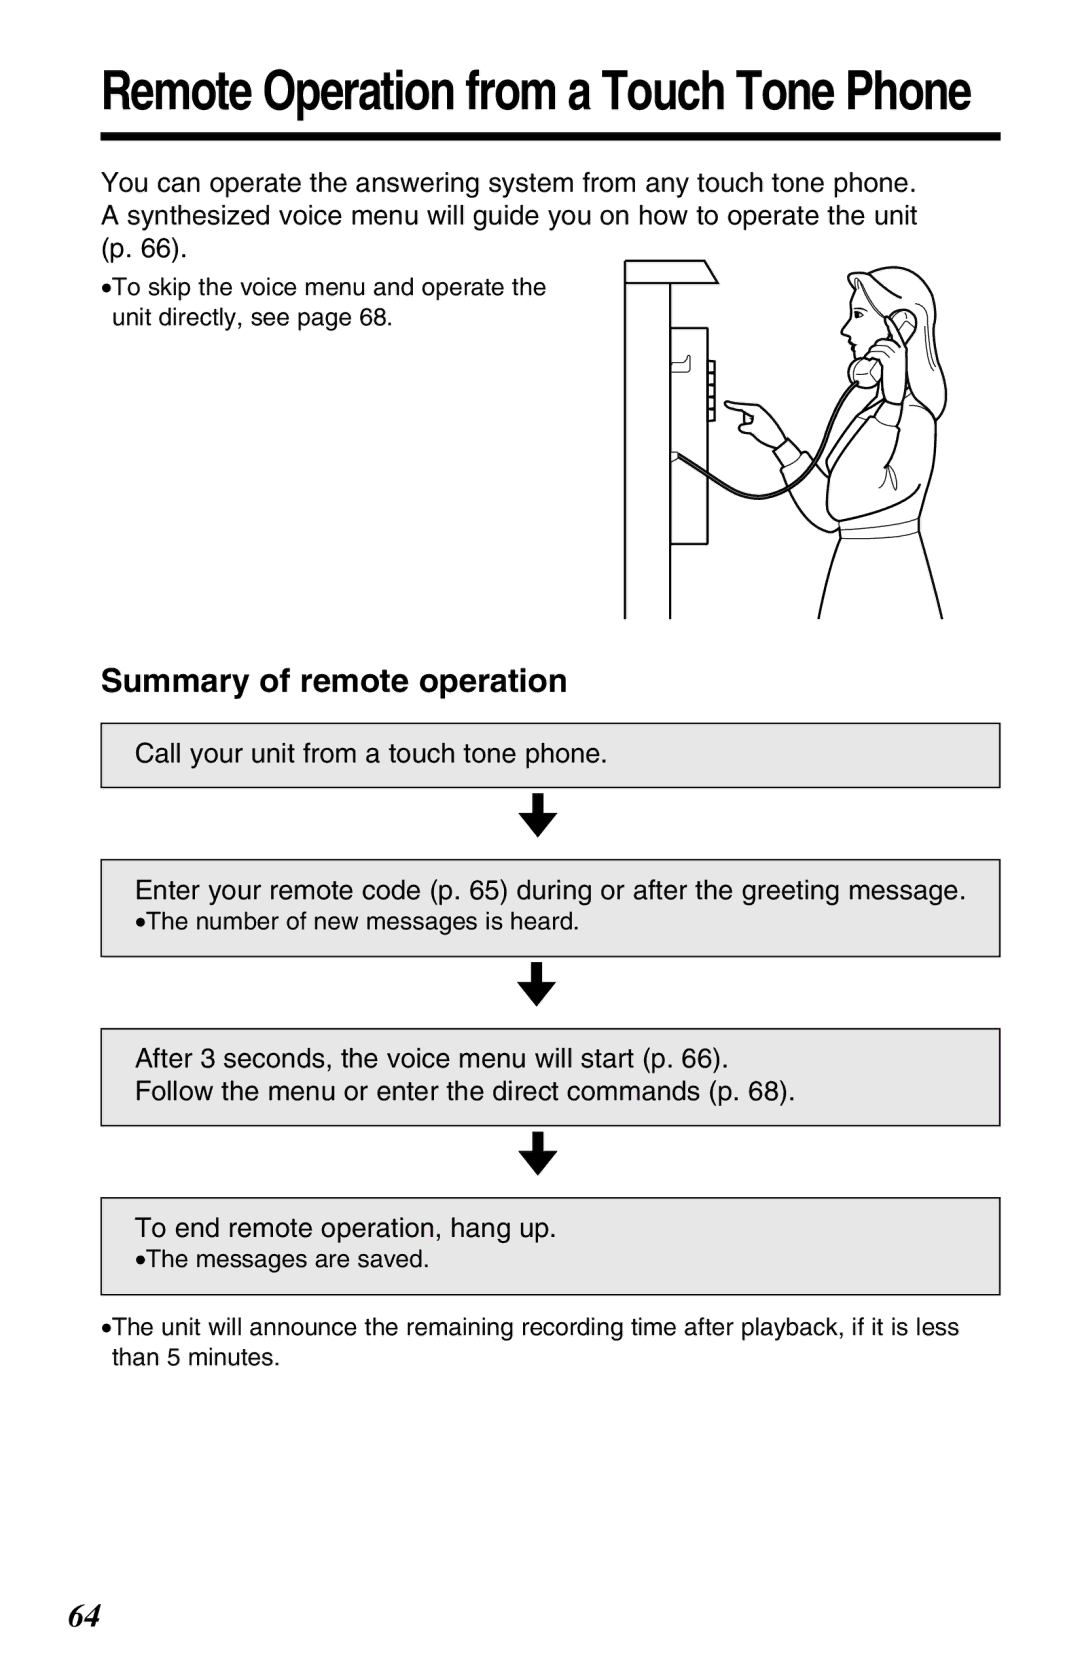 Panasonic KX-TG2670N operating instructions Remote Operation from a Touch Tone Phone, Summary of remote operation 